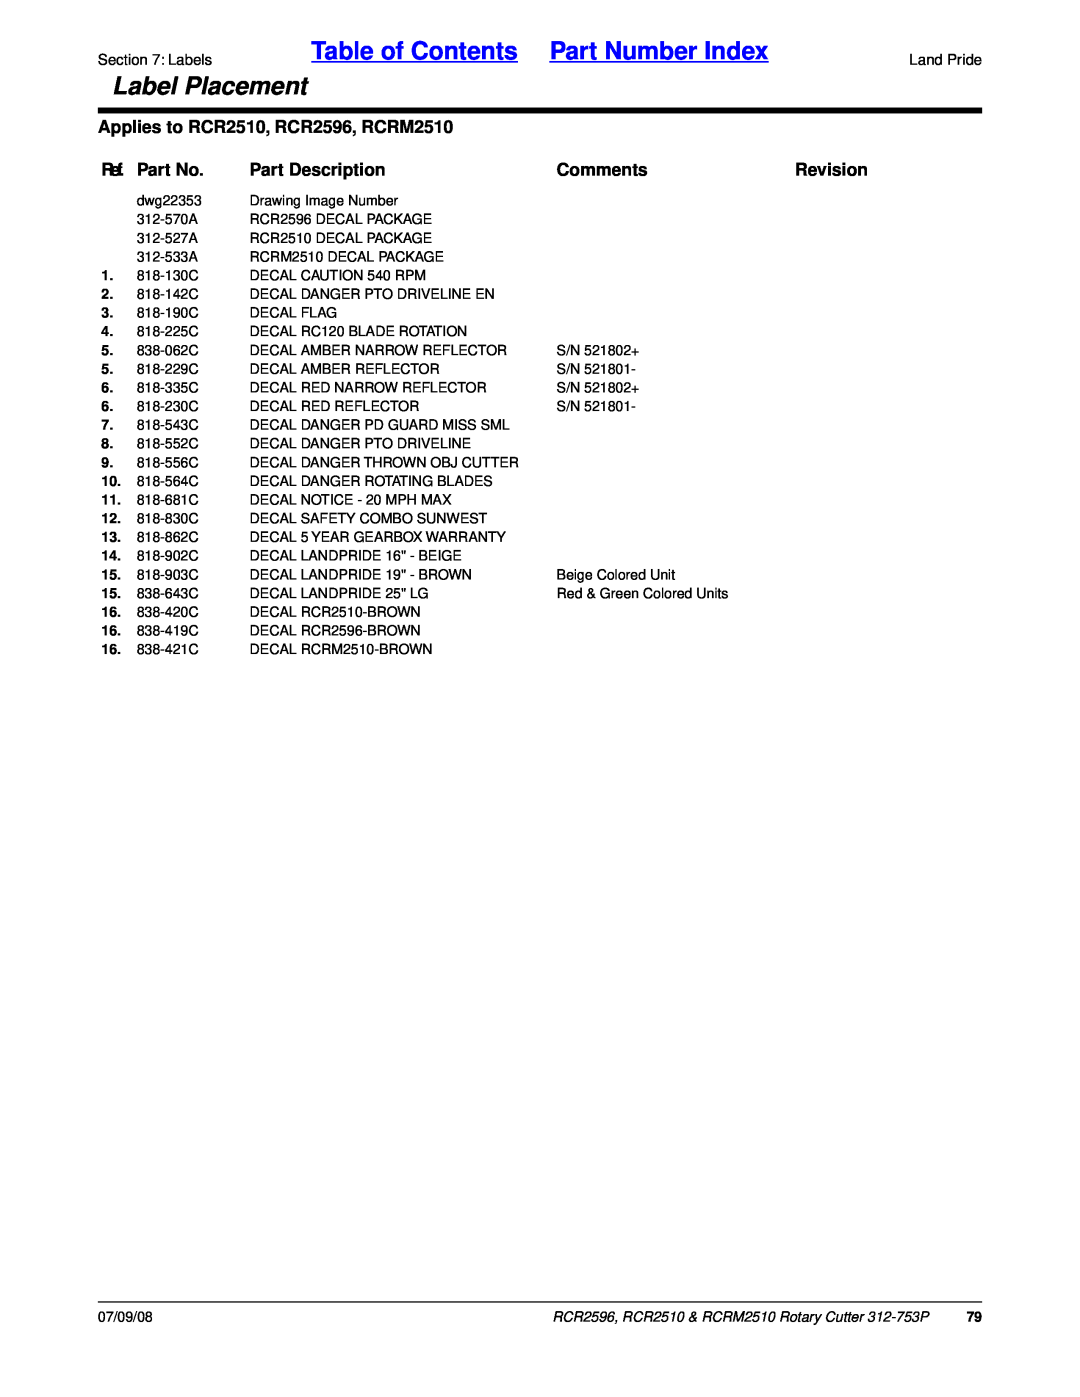 Land Pride Table of Contents Part Number Index, Label Placement, Applies to RCR2510, RCR2596, RCRM2510, Ref. Part No 